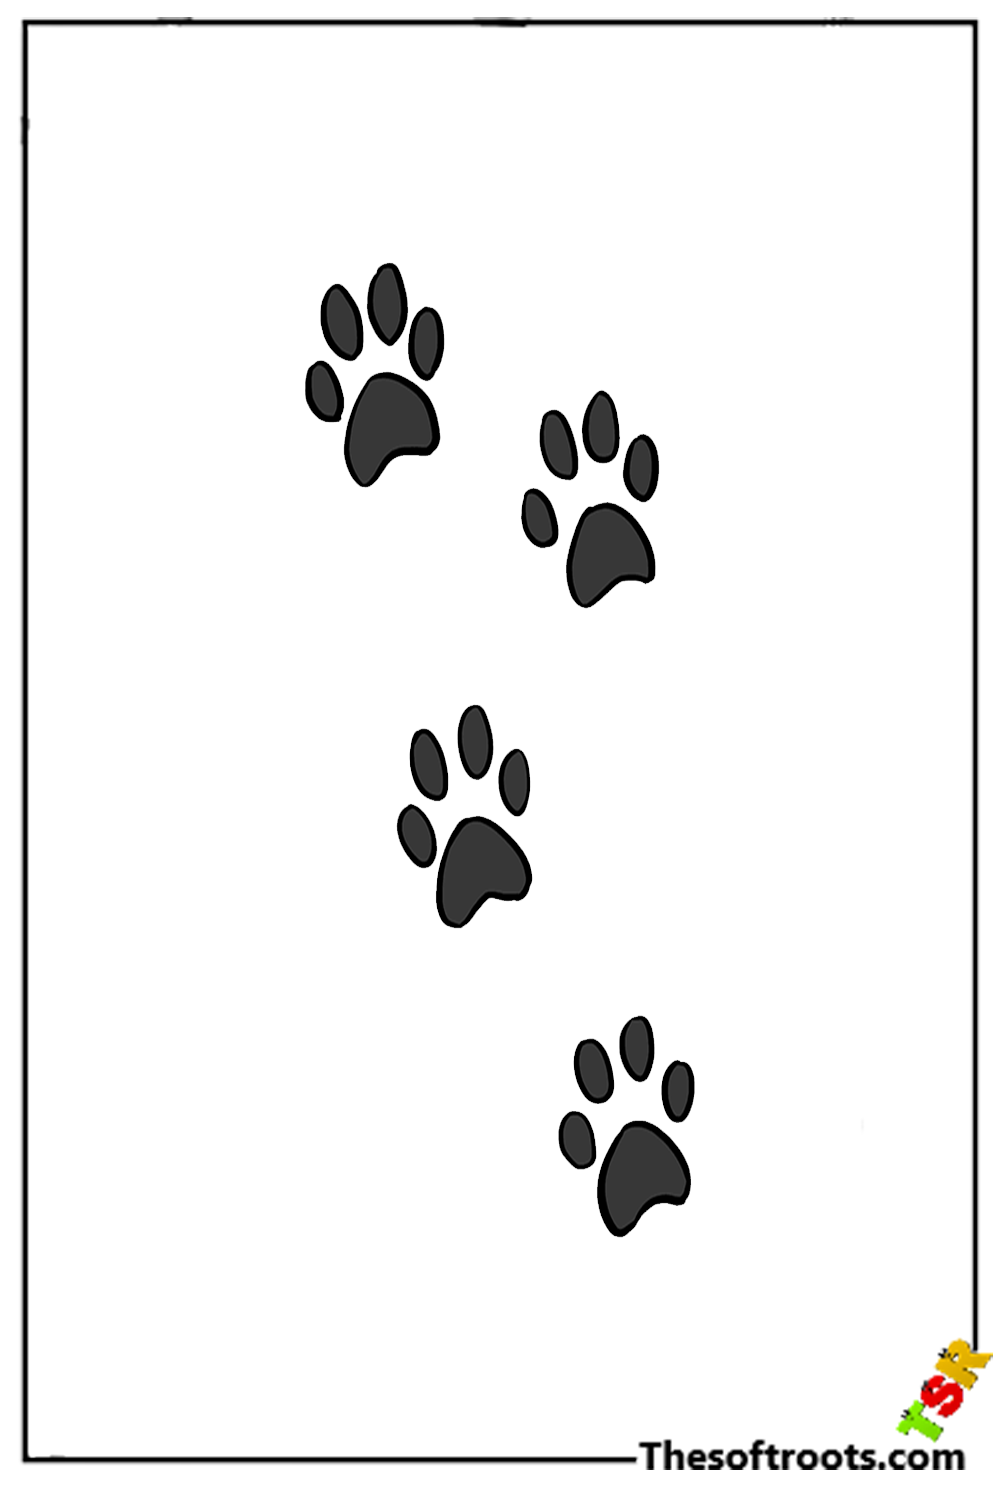 How to Draw Cat Paw Prints Drawing Step By Step